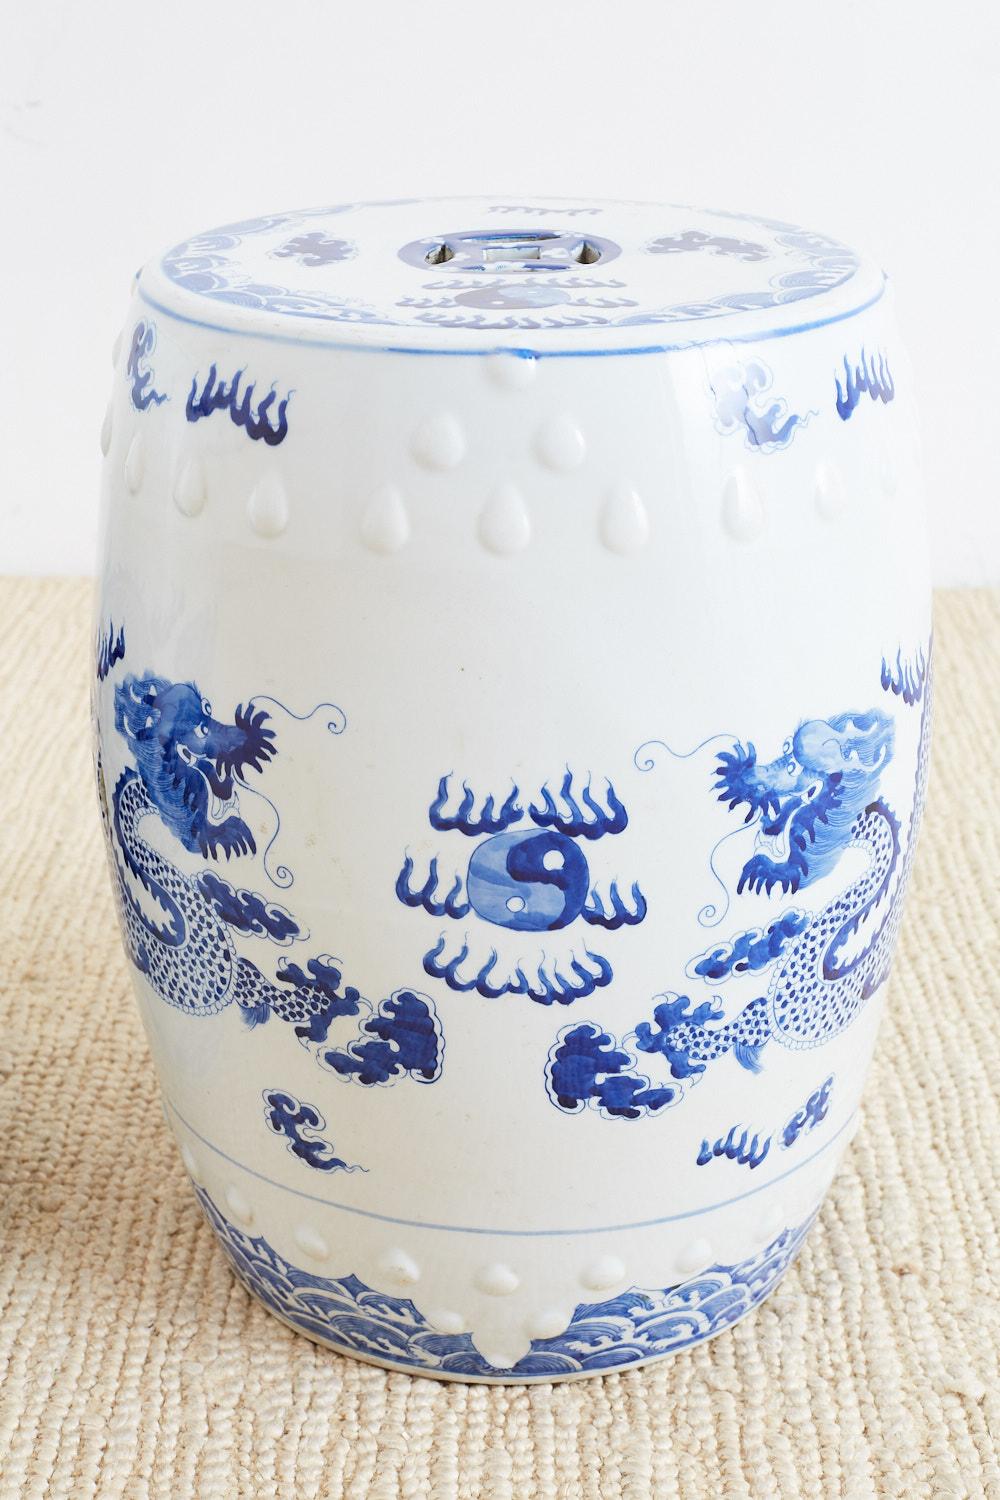 Porcelain Chinese Blue and White Garden Stool Drink Tables